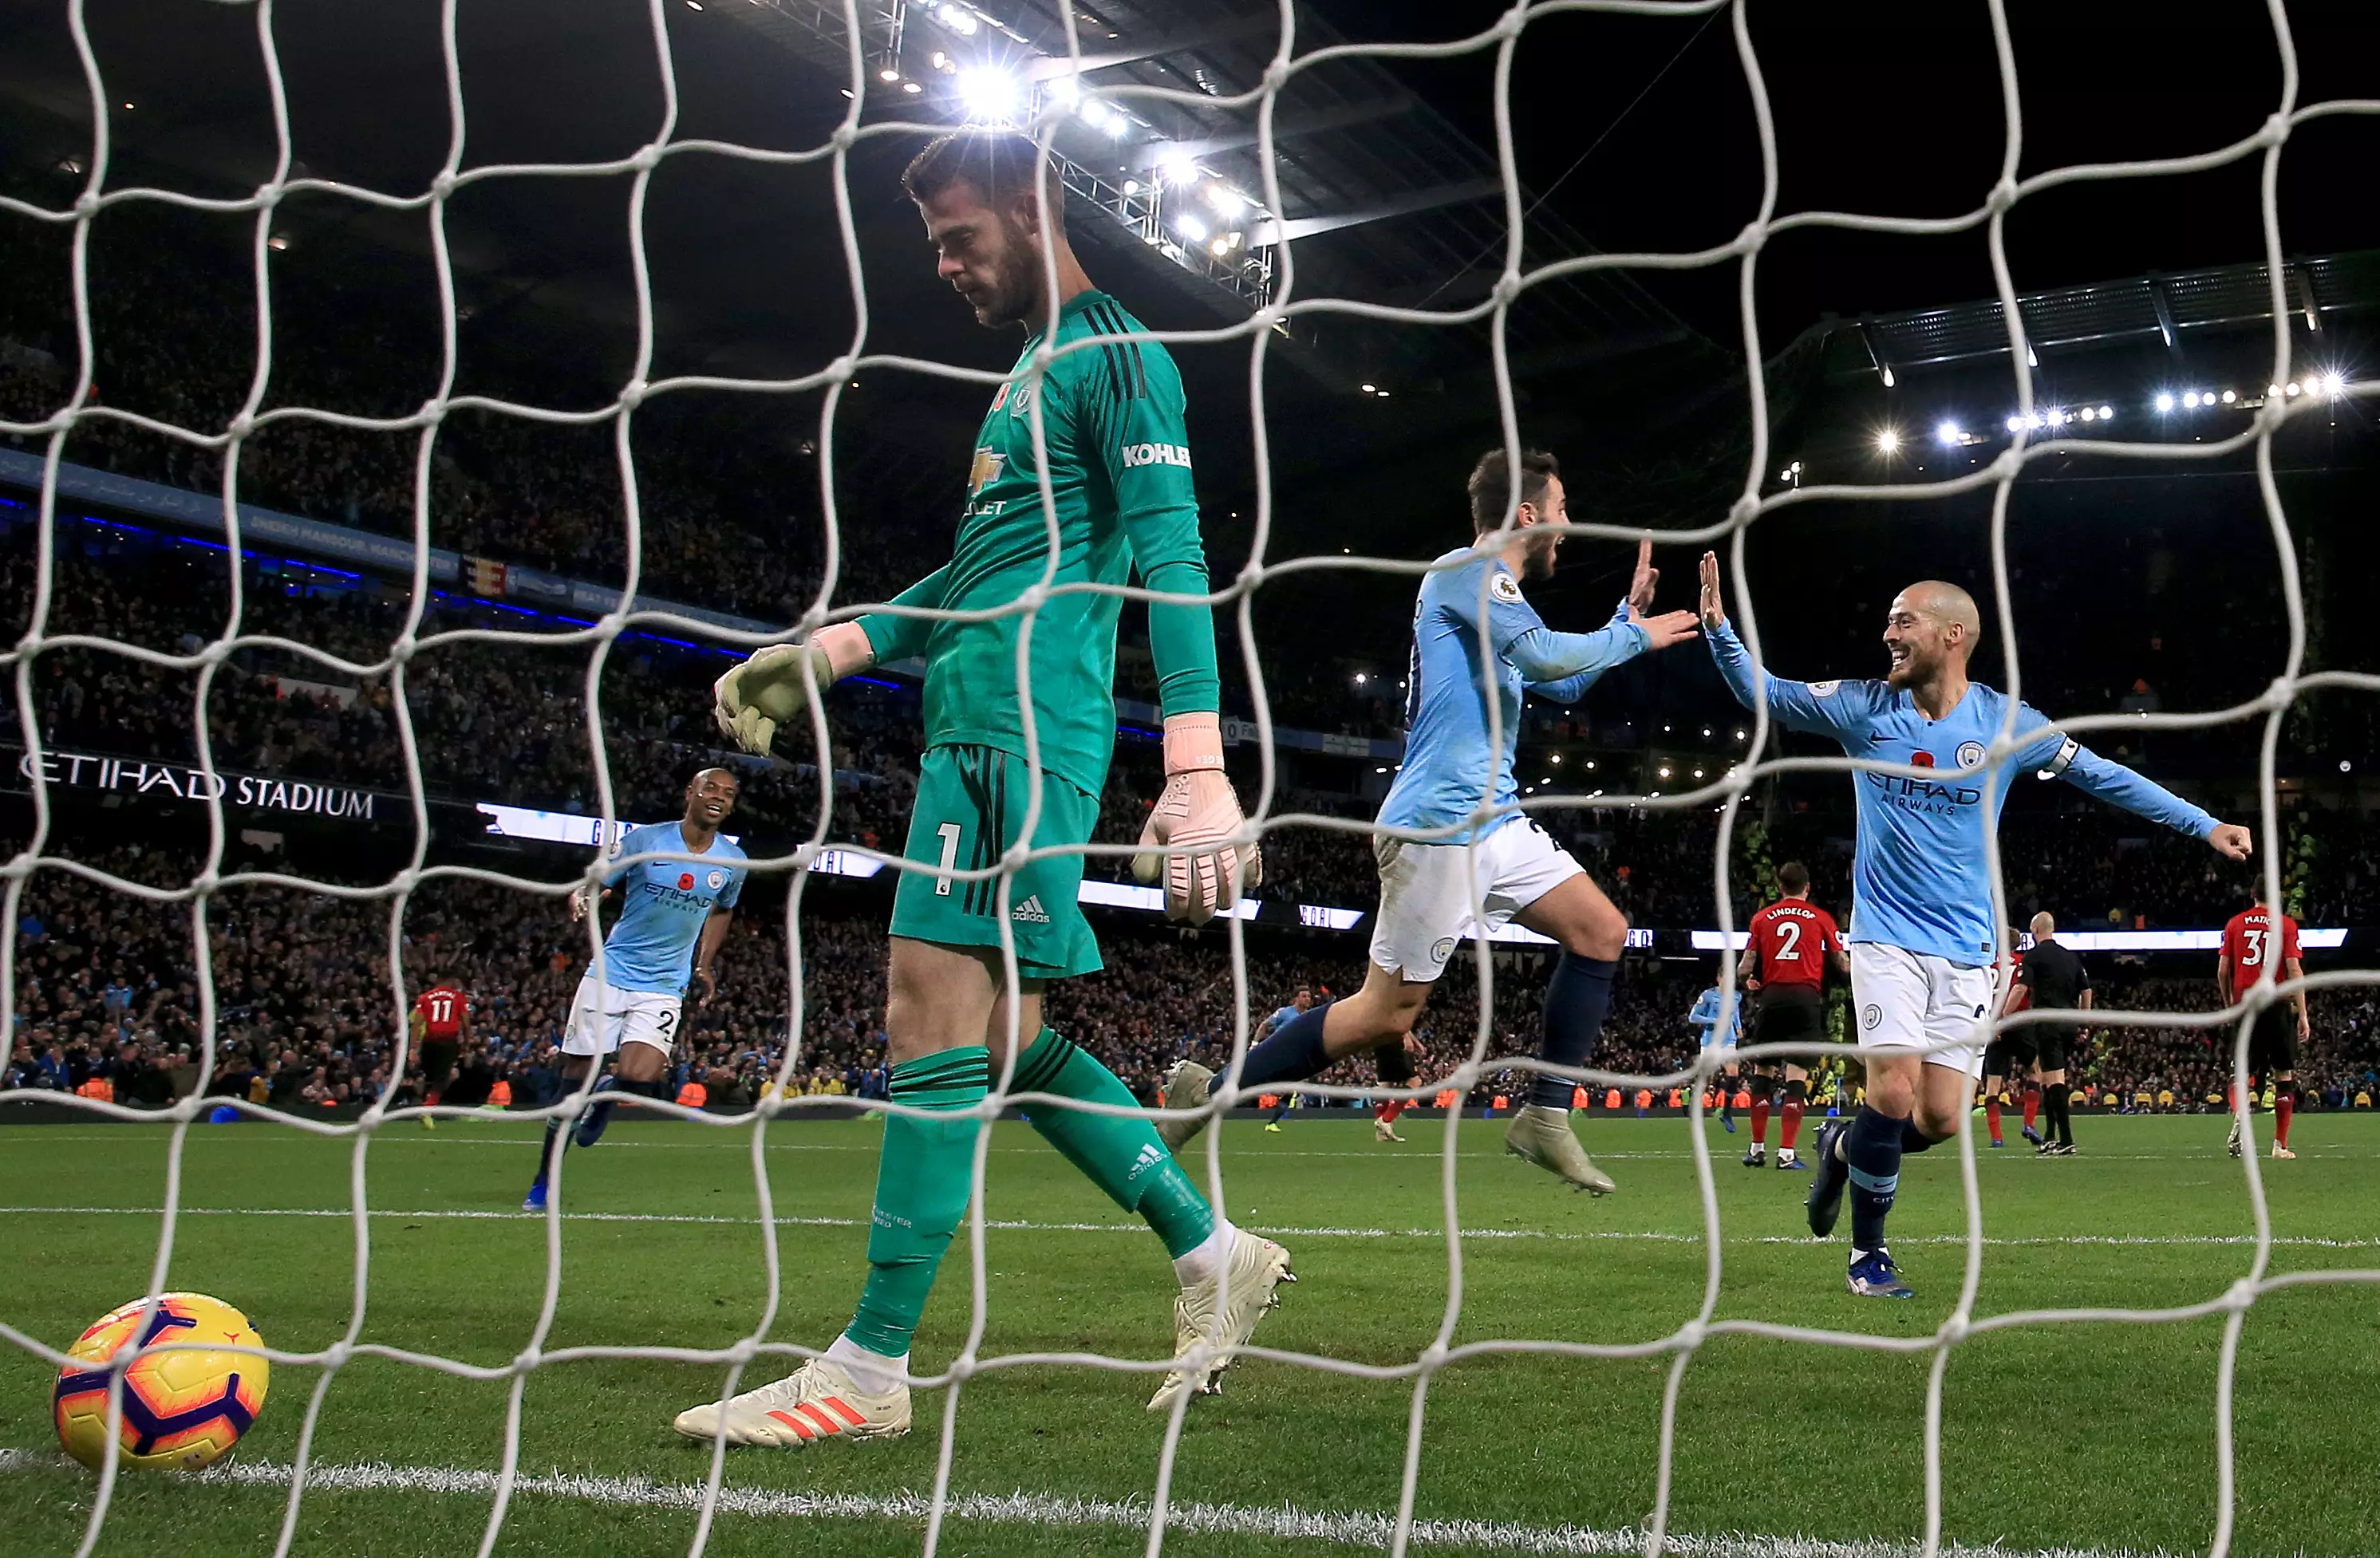 De Gea's form has been poor in the past year. Image: PA Images